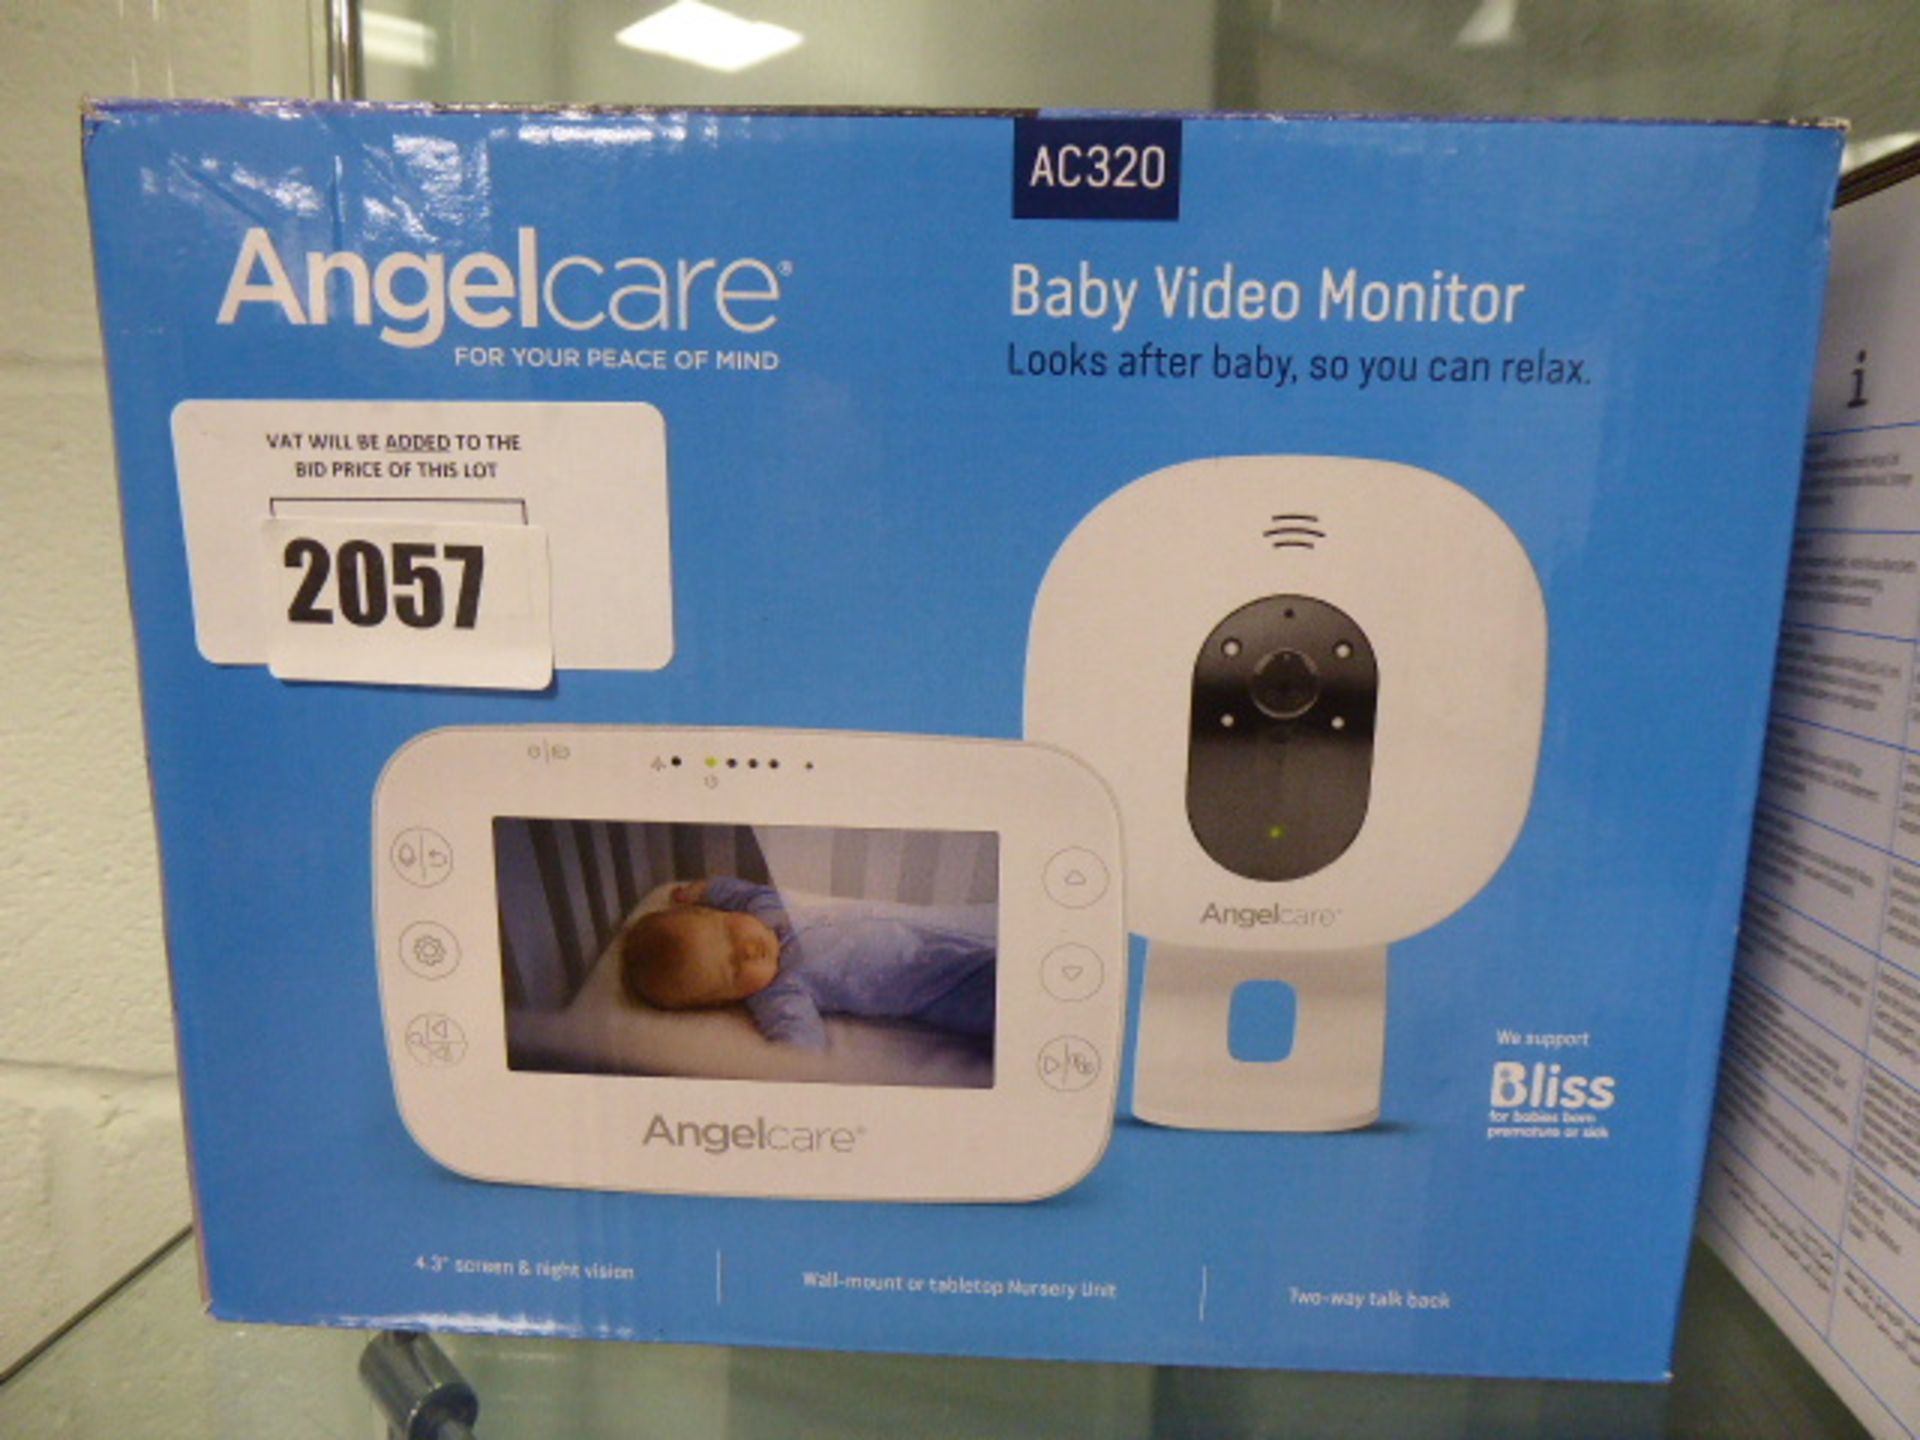 Angelcare AC320 baby video monitor